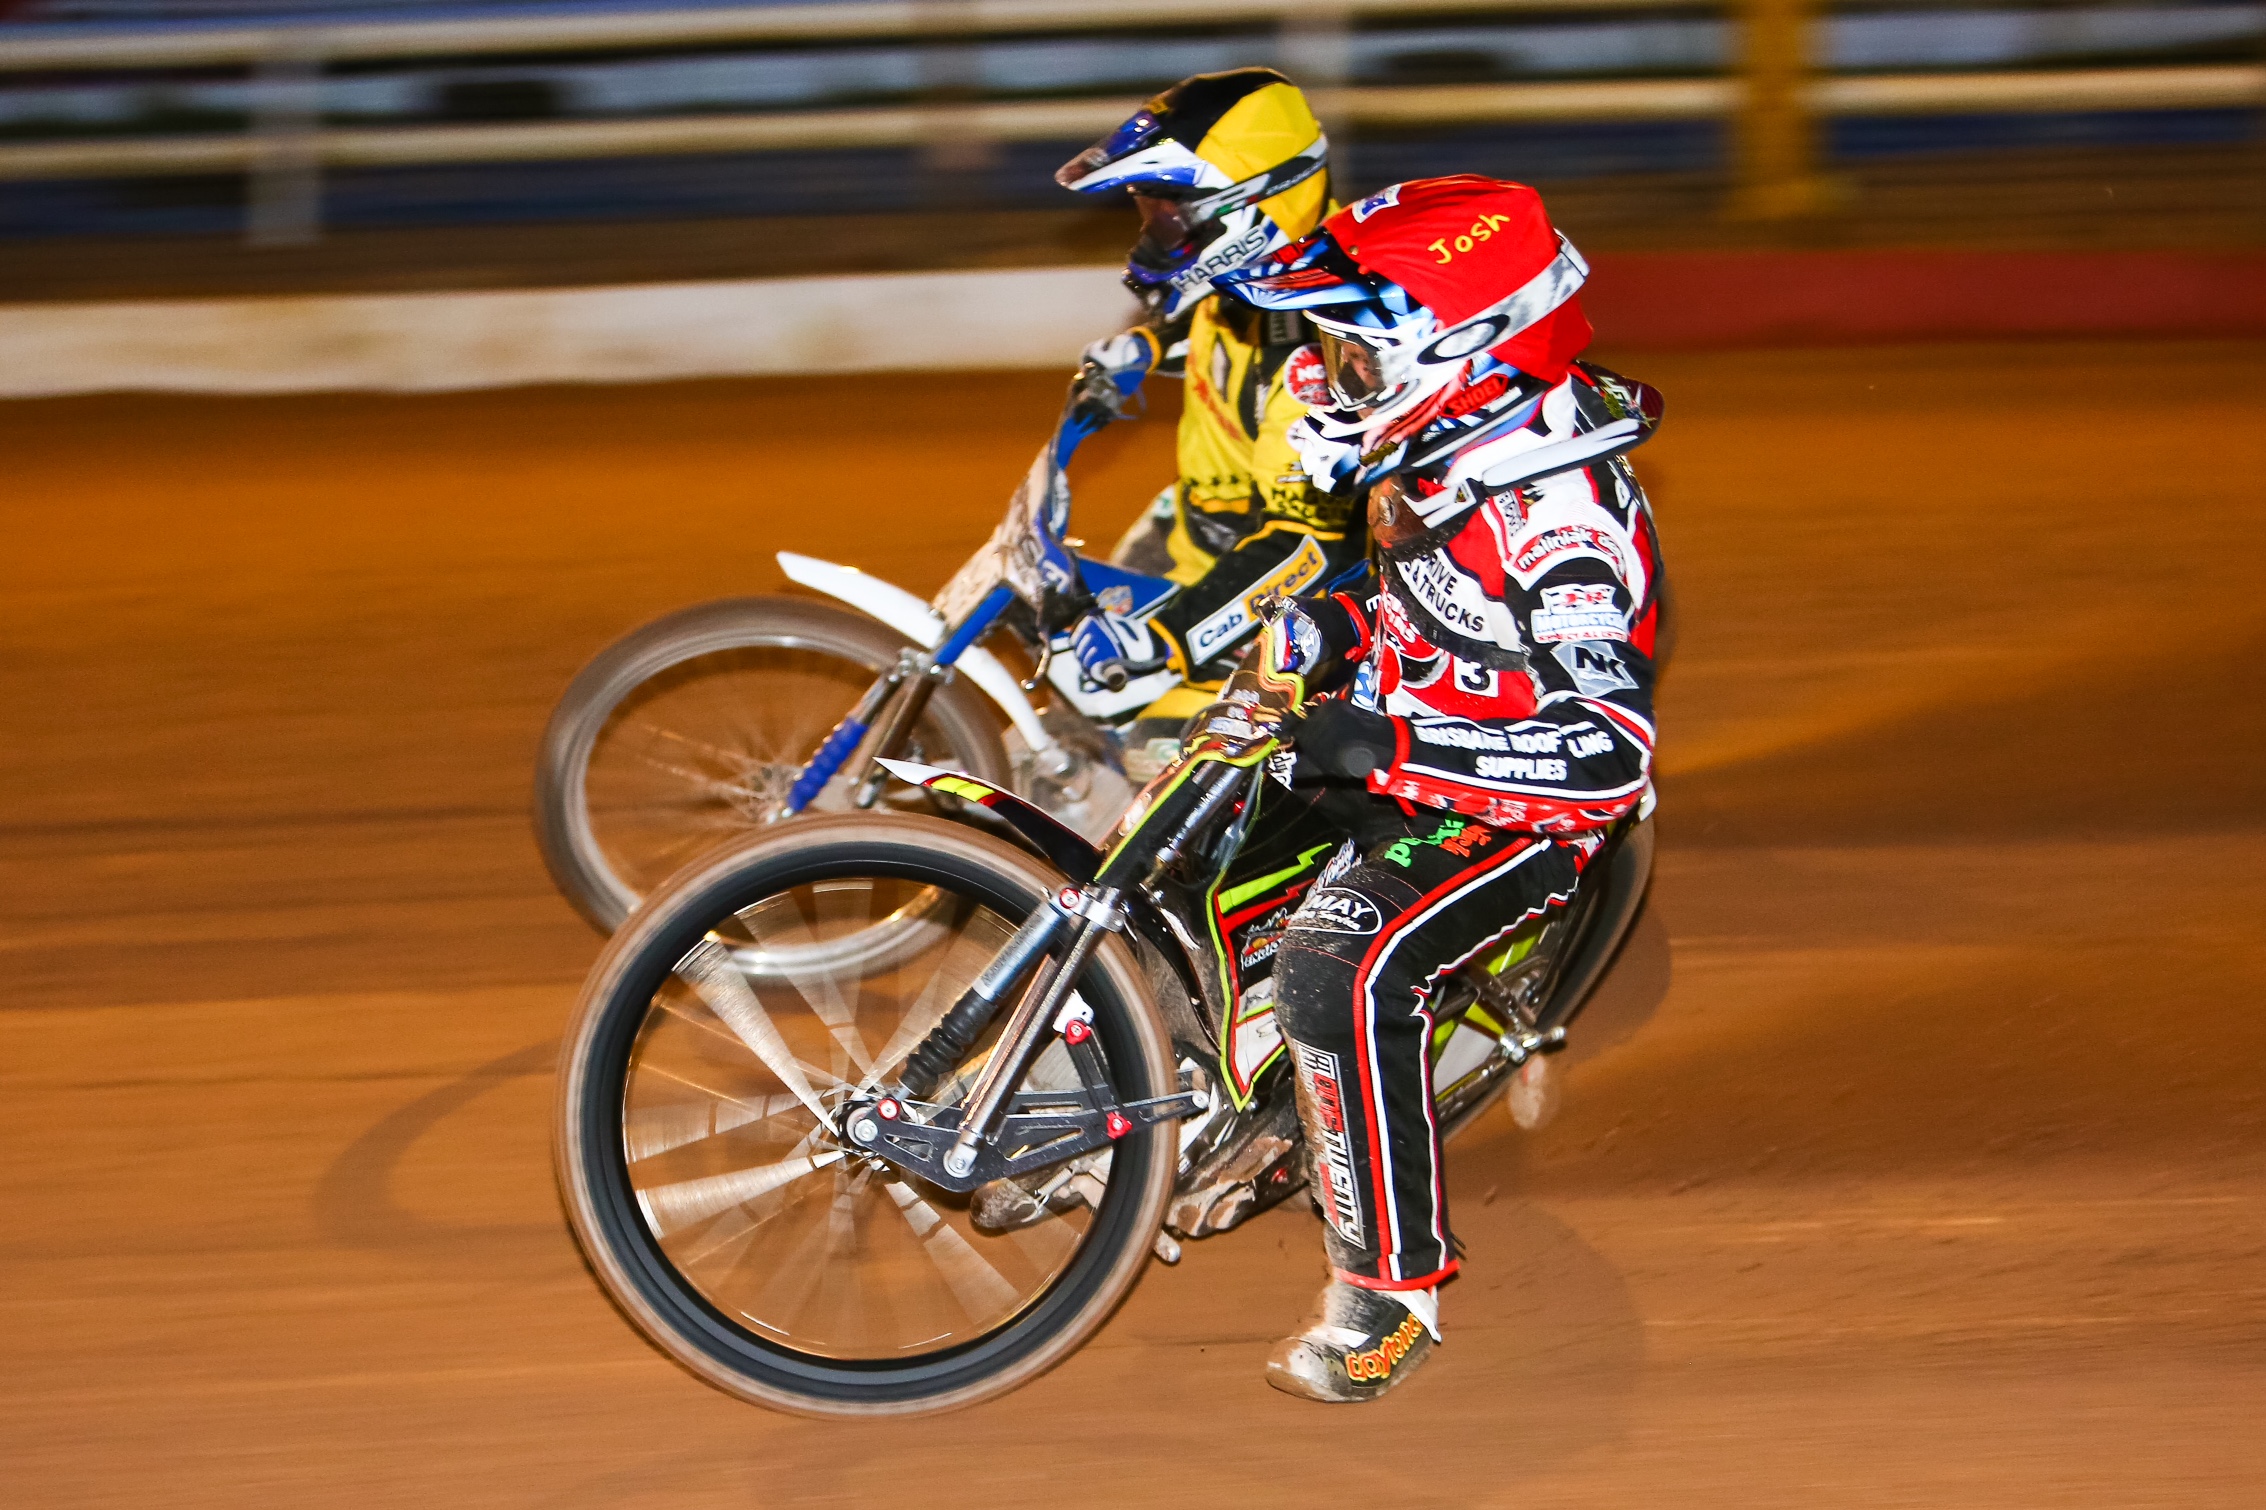 Down but not out, Coventry Bees' Jason Garrity speaks to Total Sport